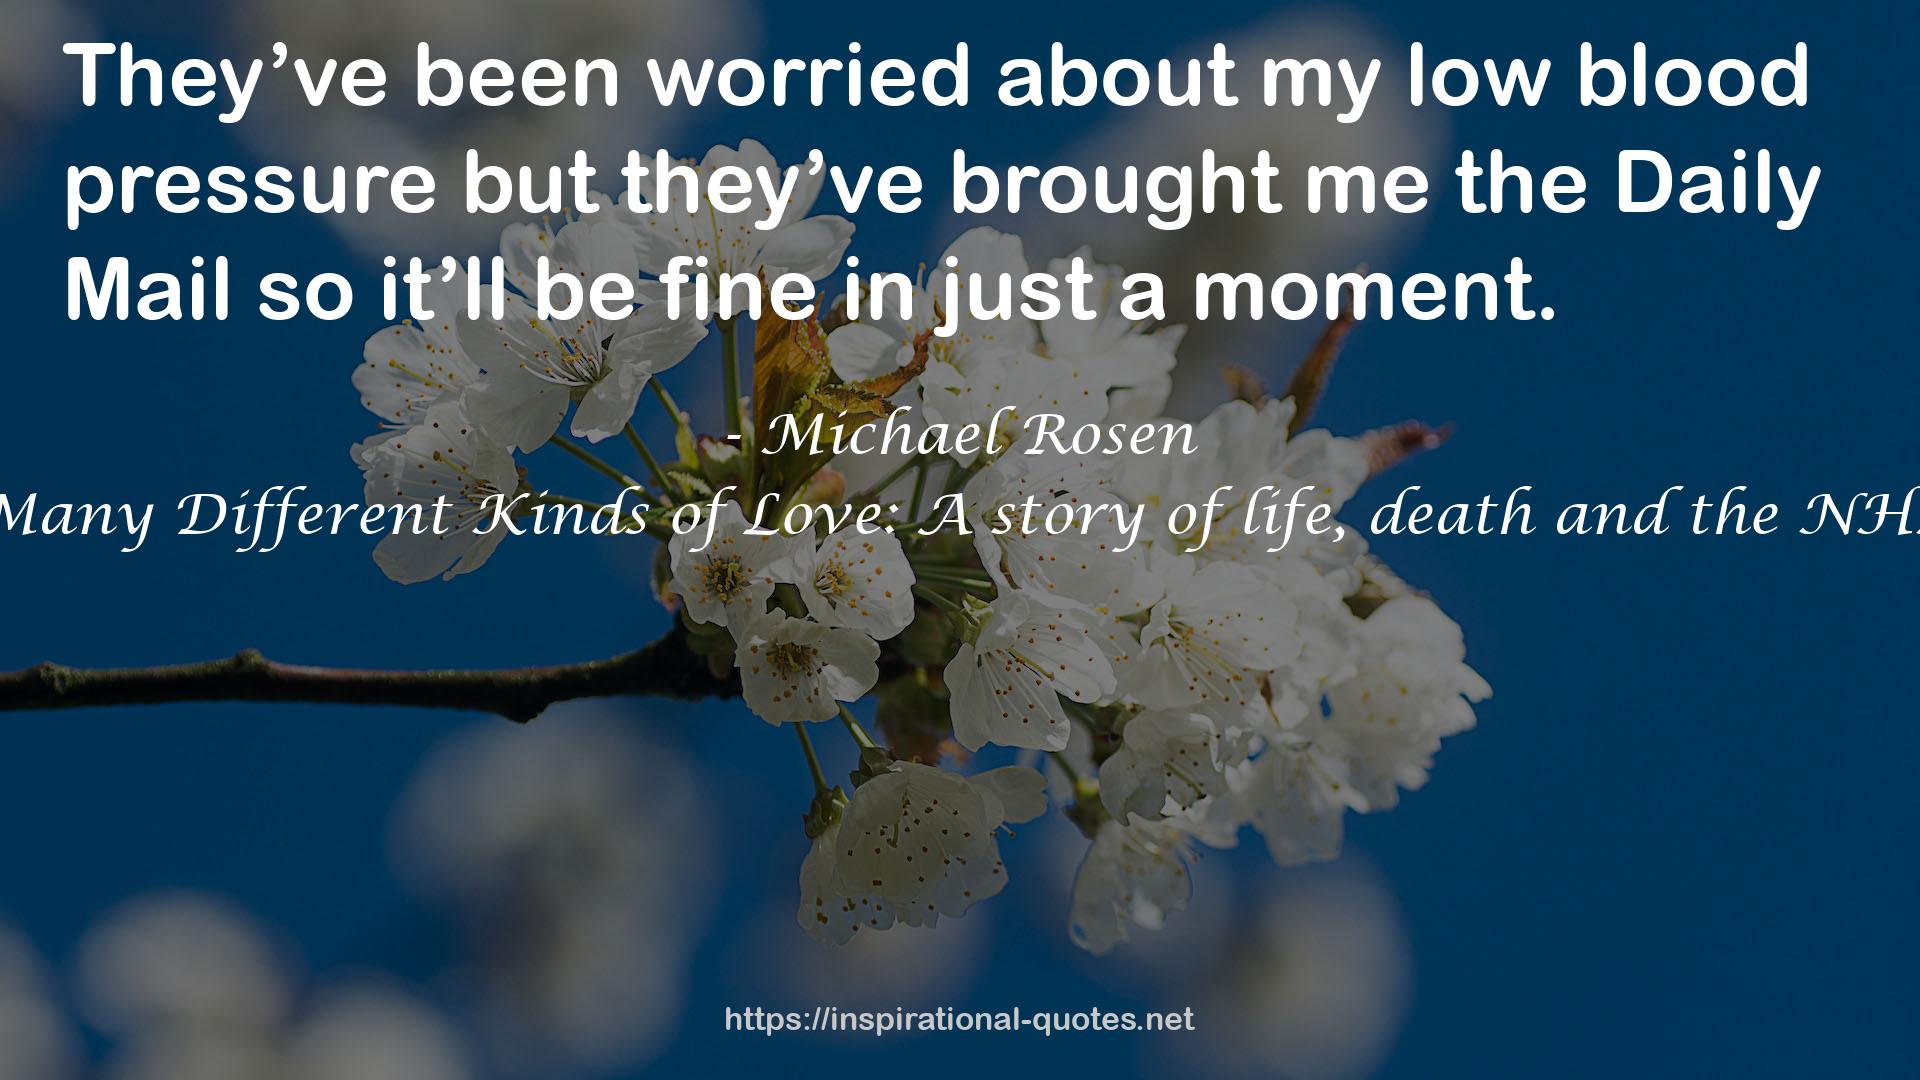 Many Different Kinds of Love: A story of life, death and the NHS QUOTES